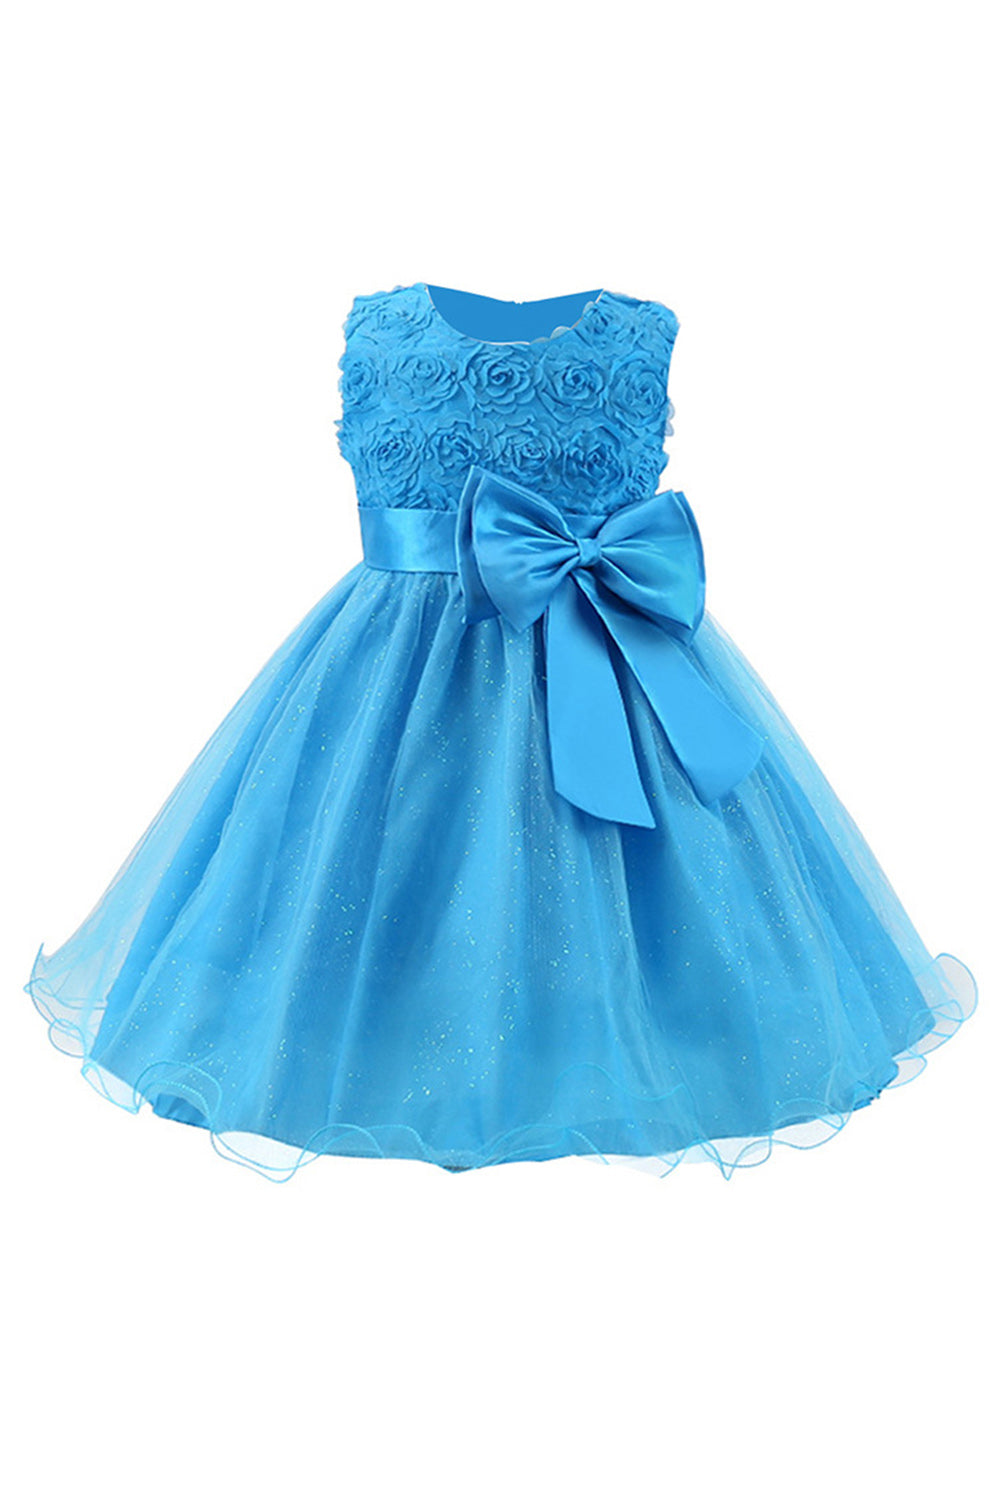 Glitter Boat Neck Pink Girls Dresses with Bow